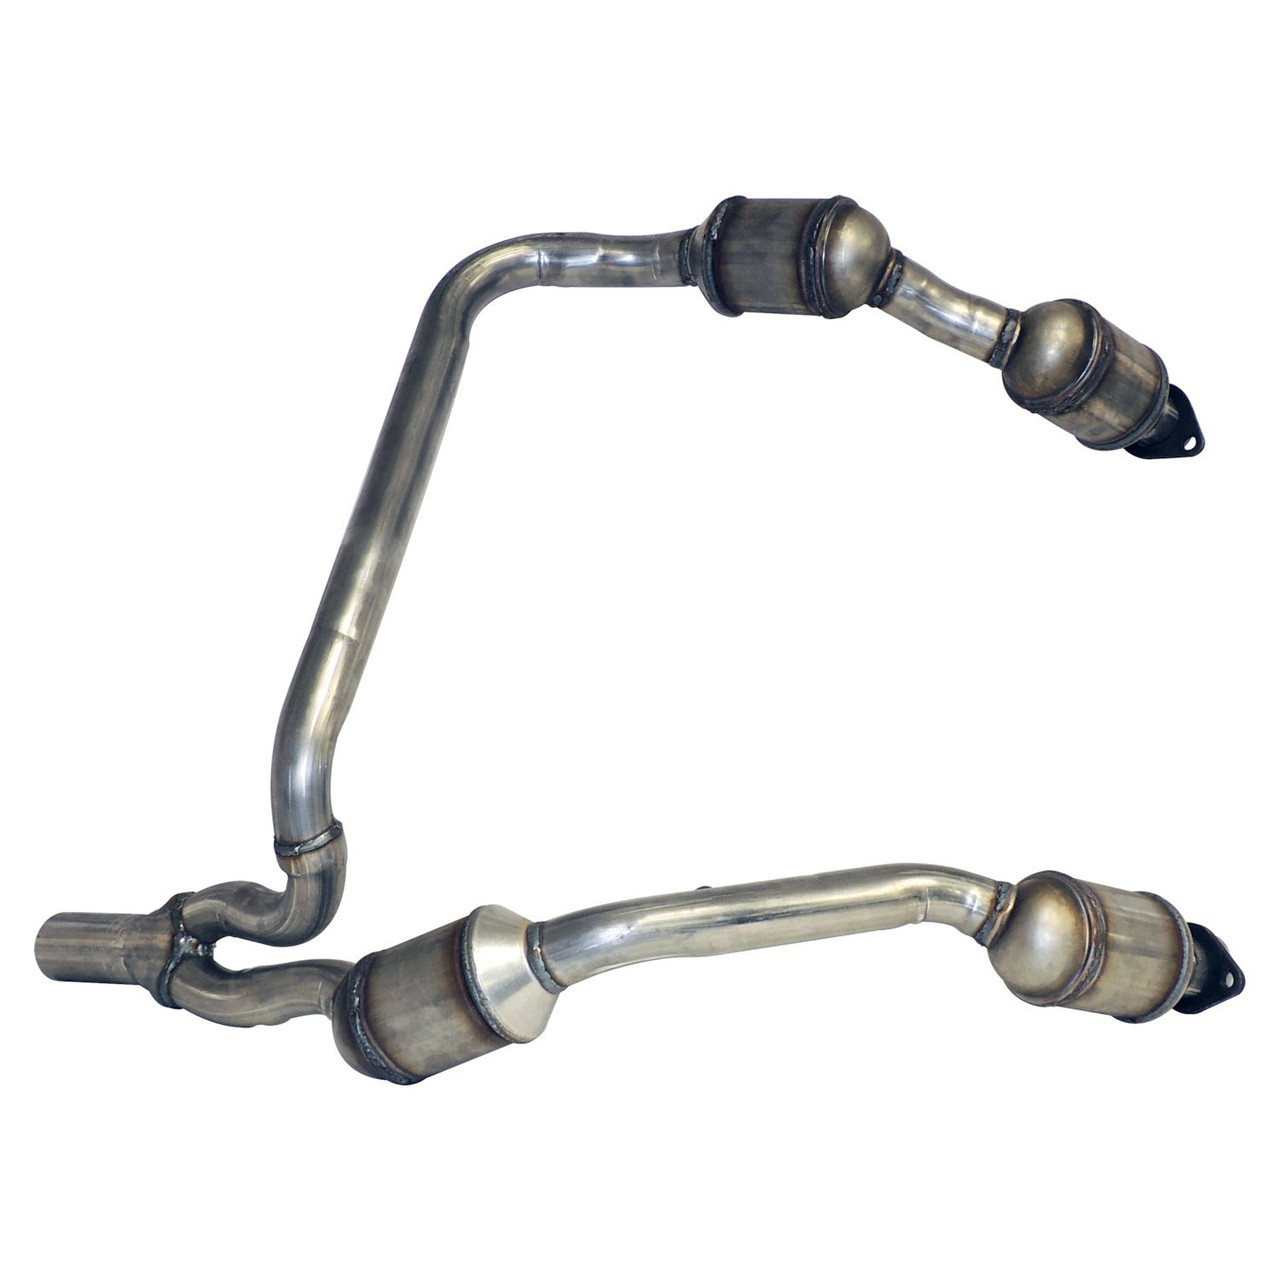 Front Exhaust Pipe w/ 4 Catalytic Converters for 07-09 JK Wrangler w/   Eng. - JeepHut Offroad